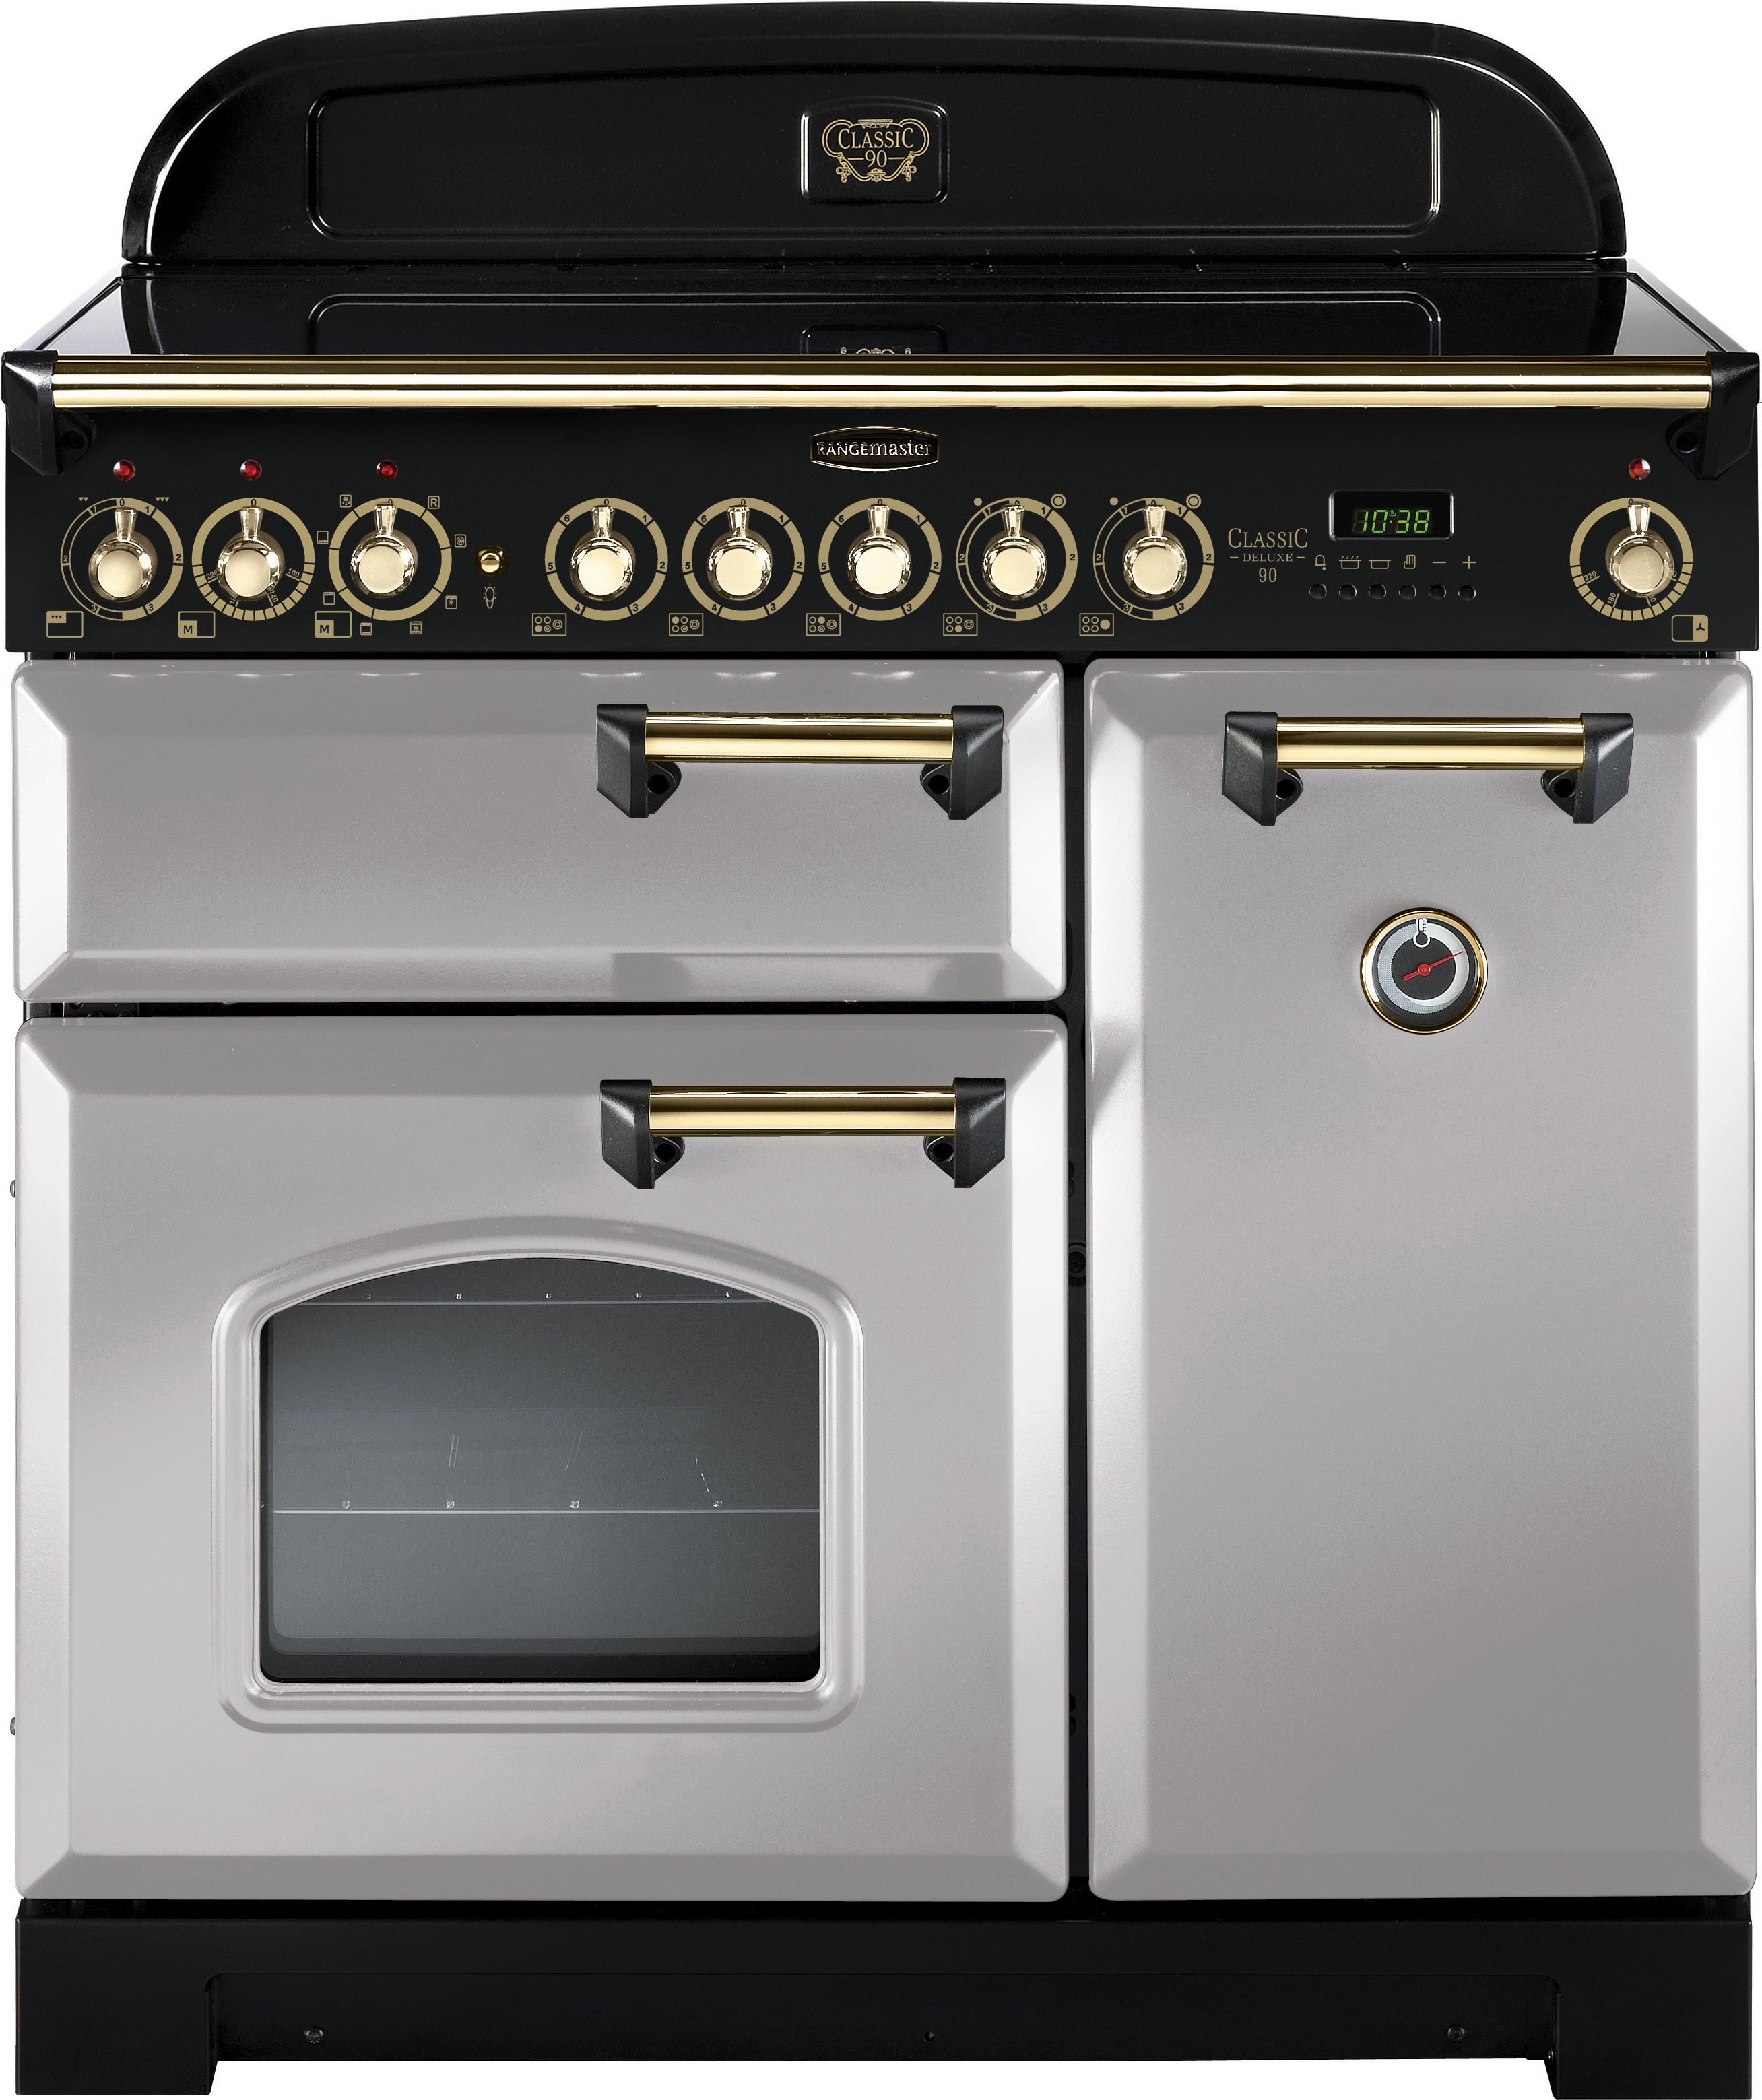 Rangemaster Classic Deluxe CDL90ECRP/B 90cm Electric Range Cooker with Ceramic Hob - Royal Pearl / Brass - A/A Rated, Grey